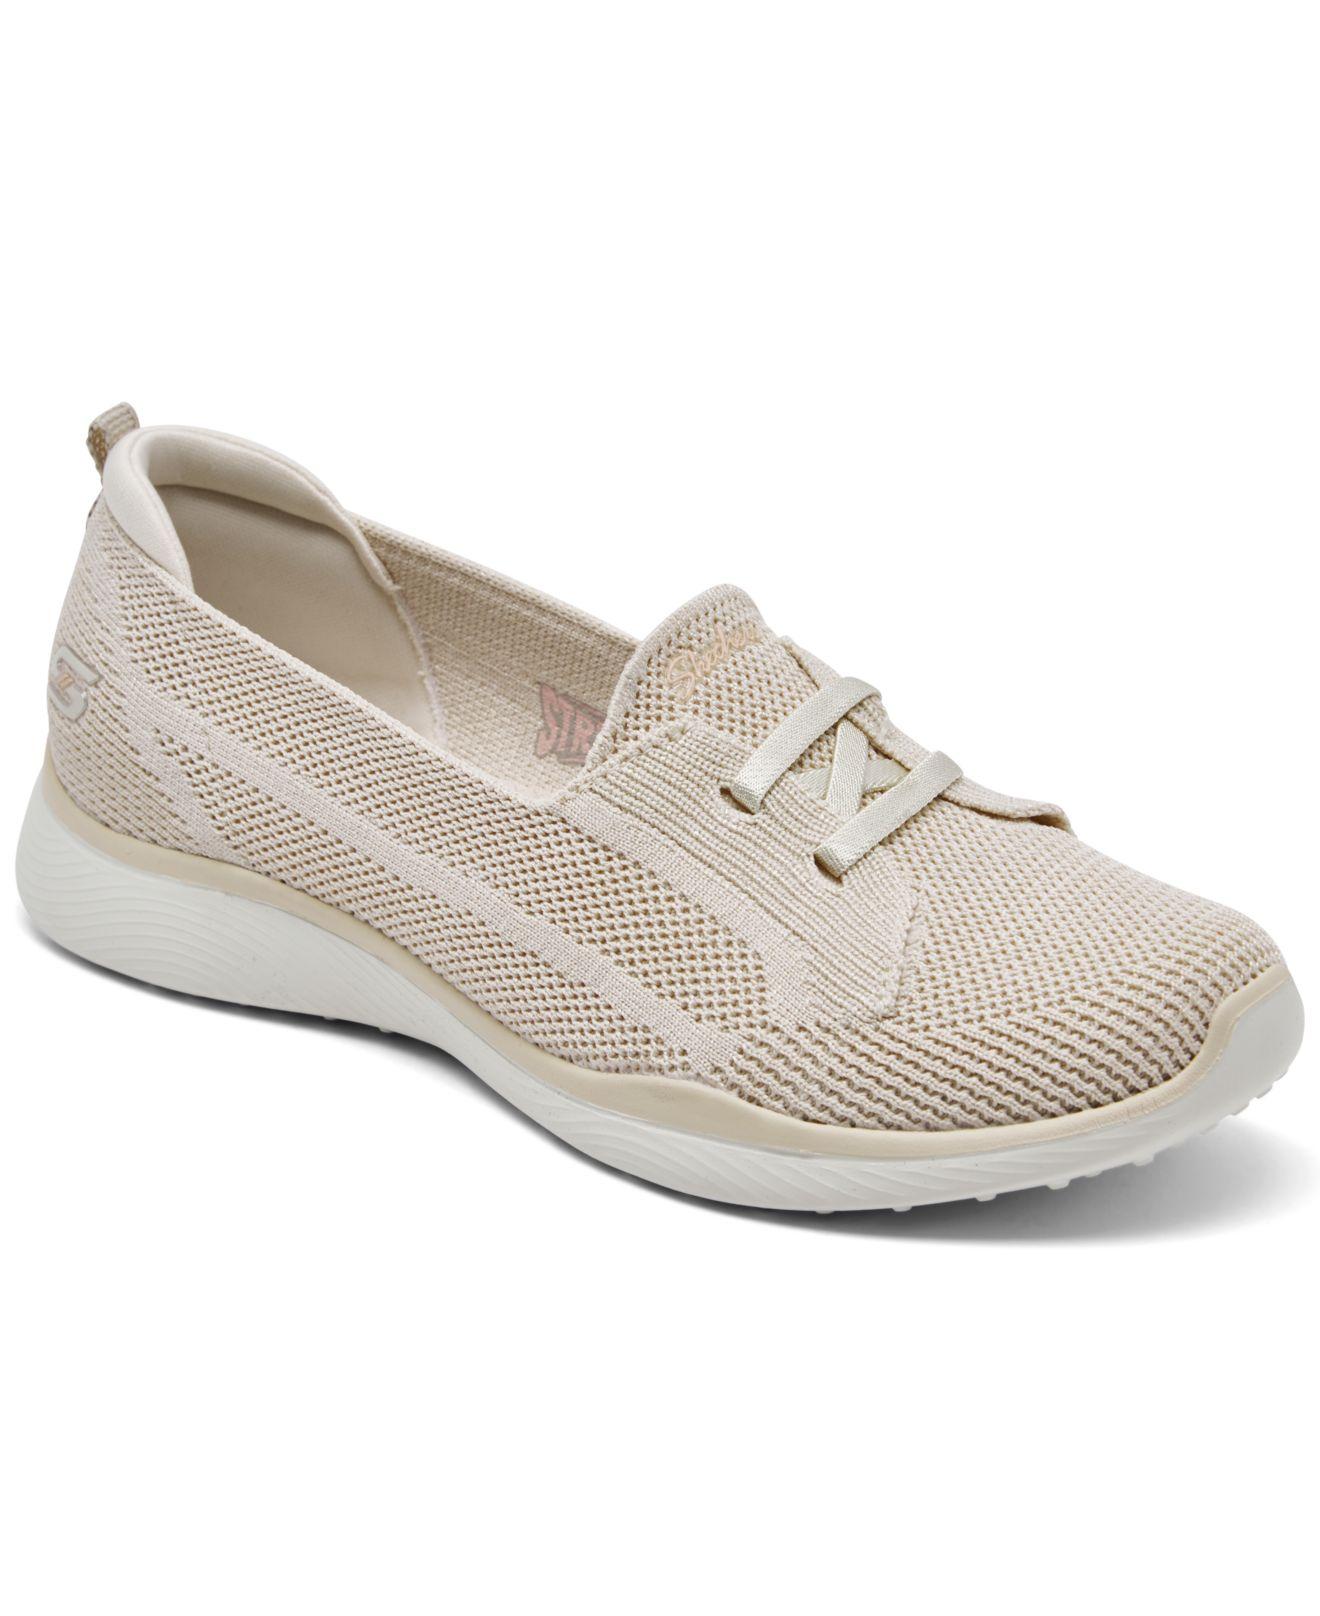 Skechers Microburst 2.0 - Irresistible Slip-on Walking Sneakers From Finish  Line in Natural | Lyst